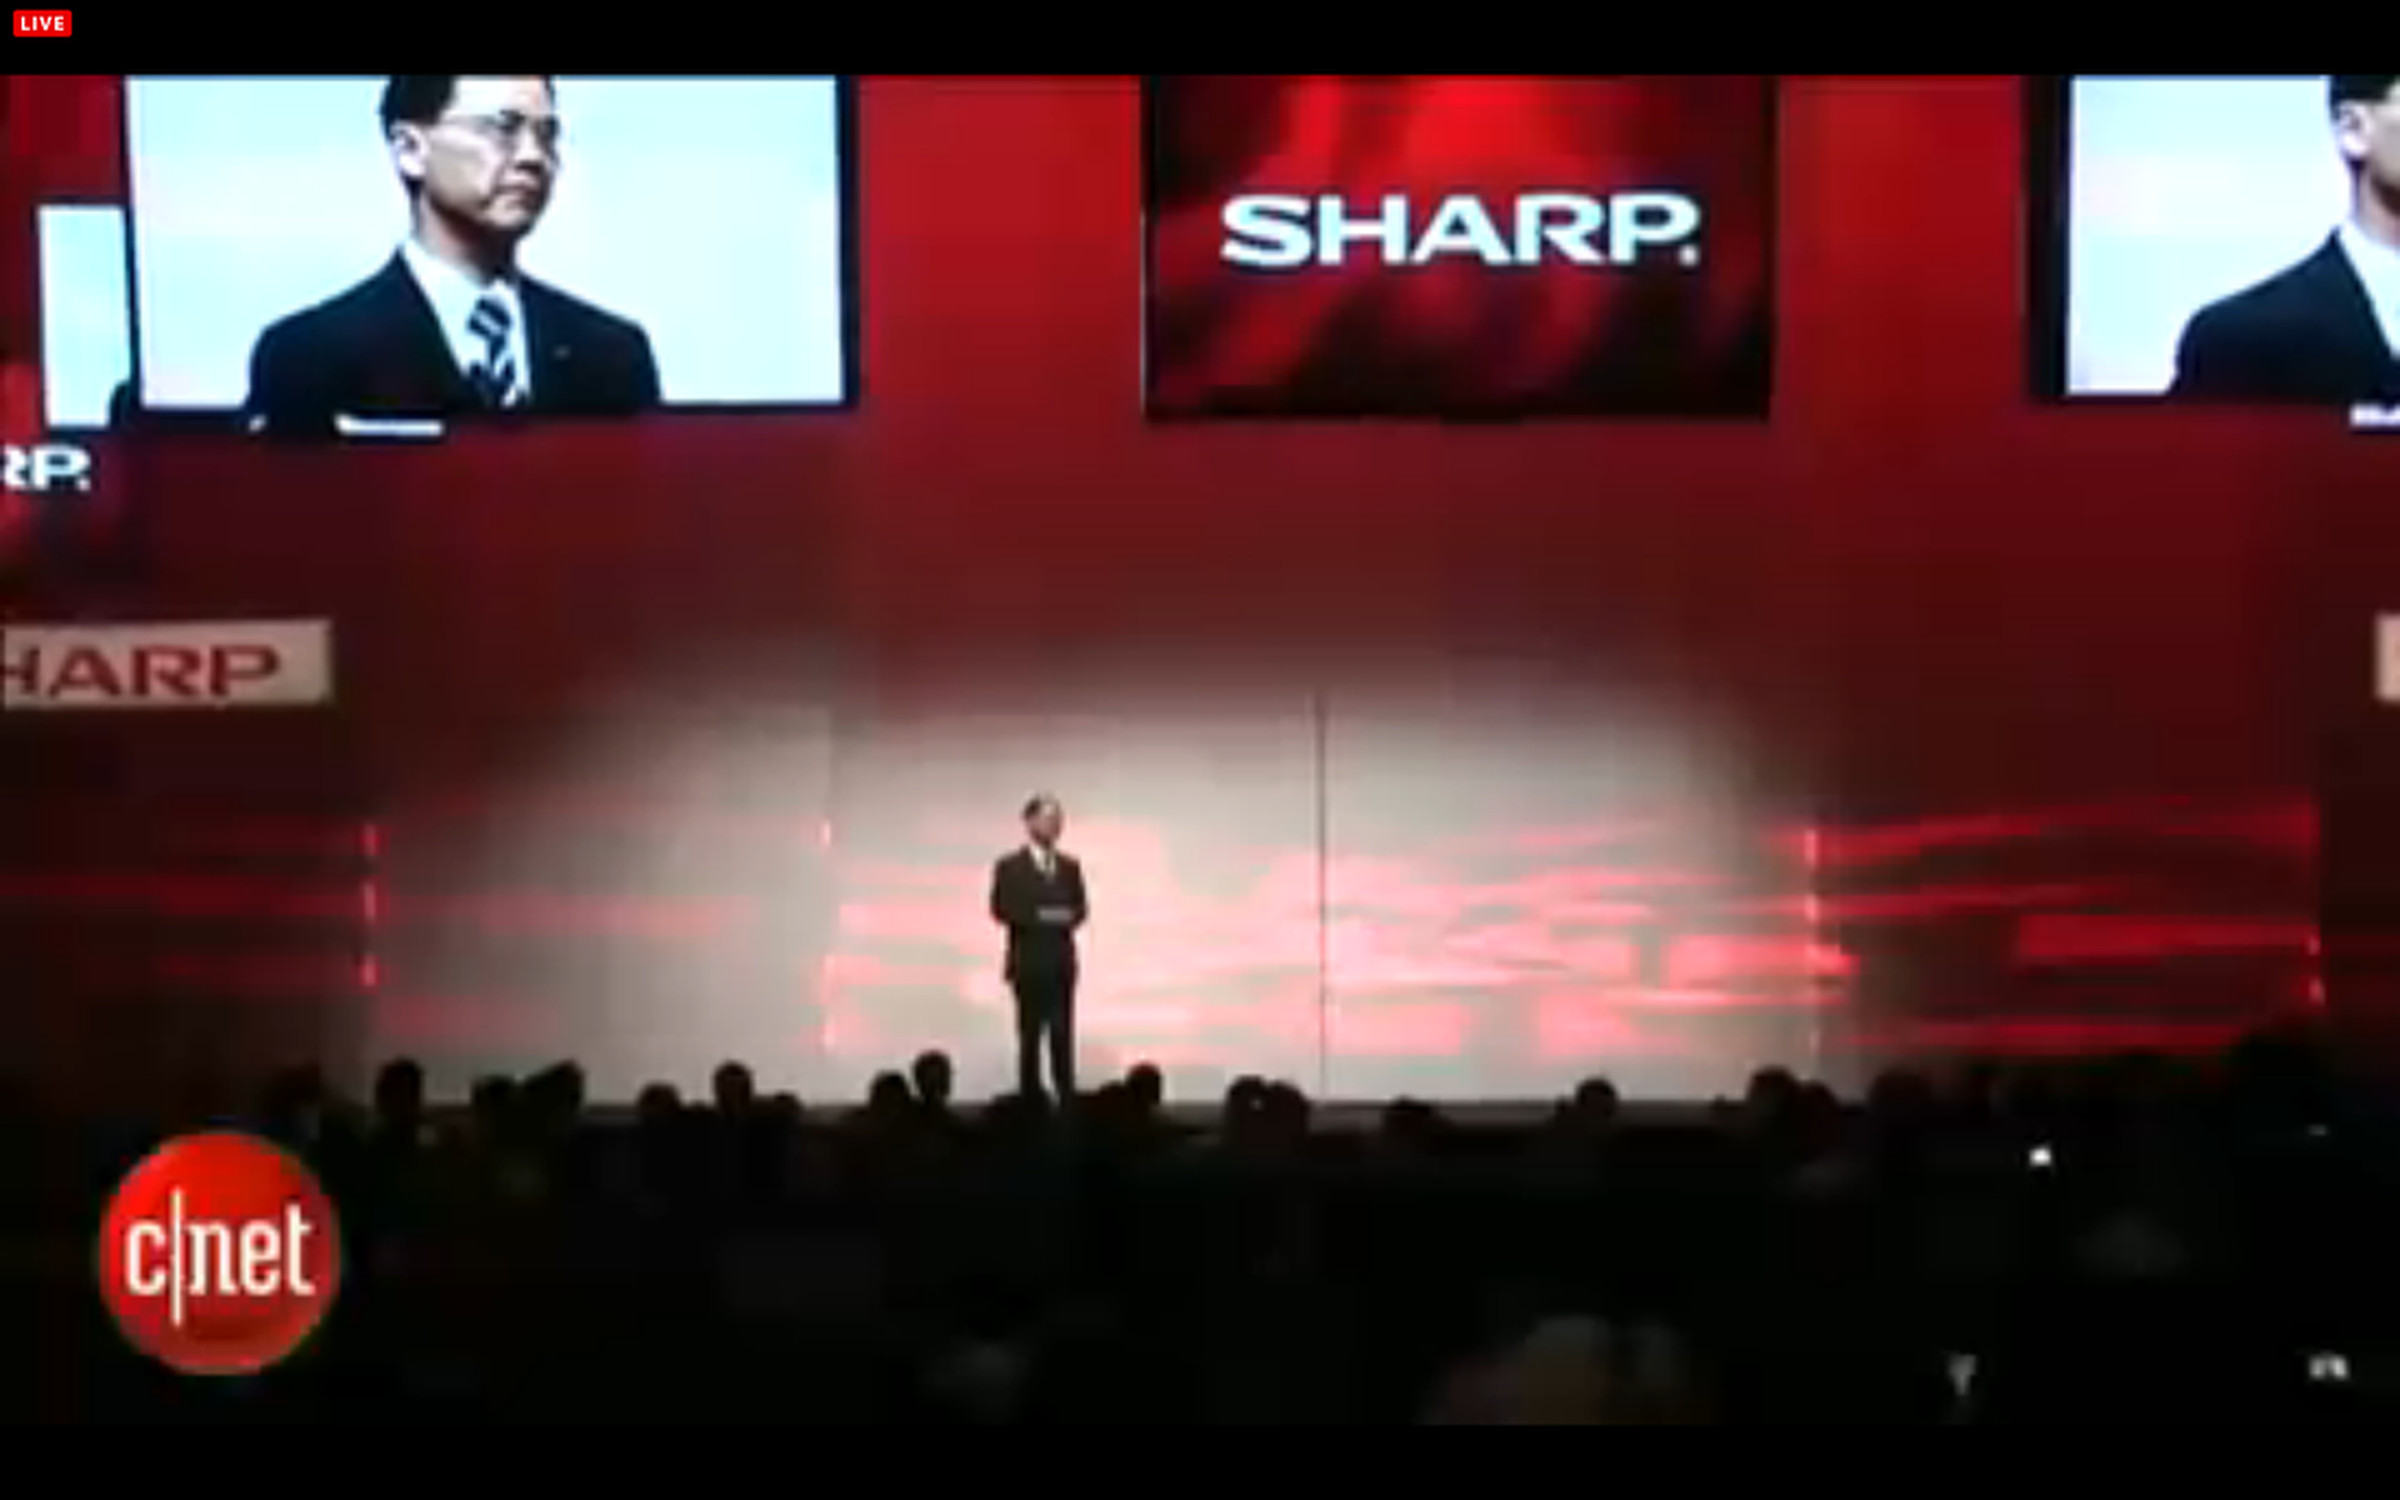 Photos from Sharp's CES 2014 event